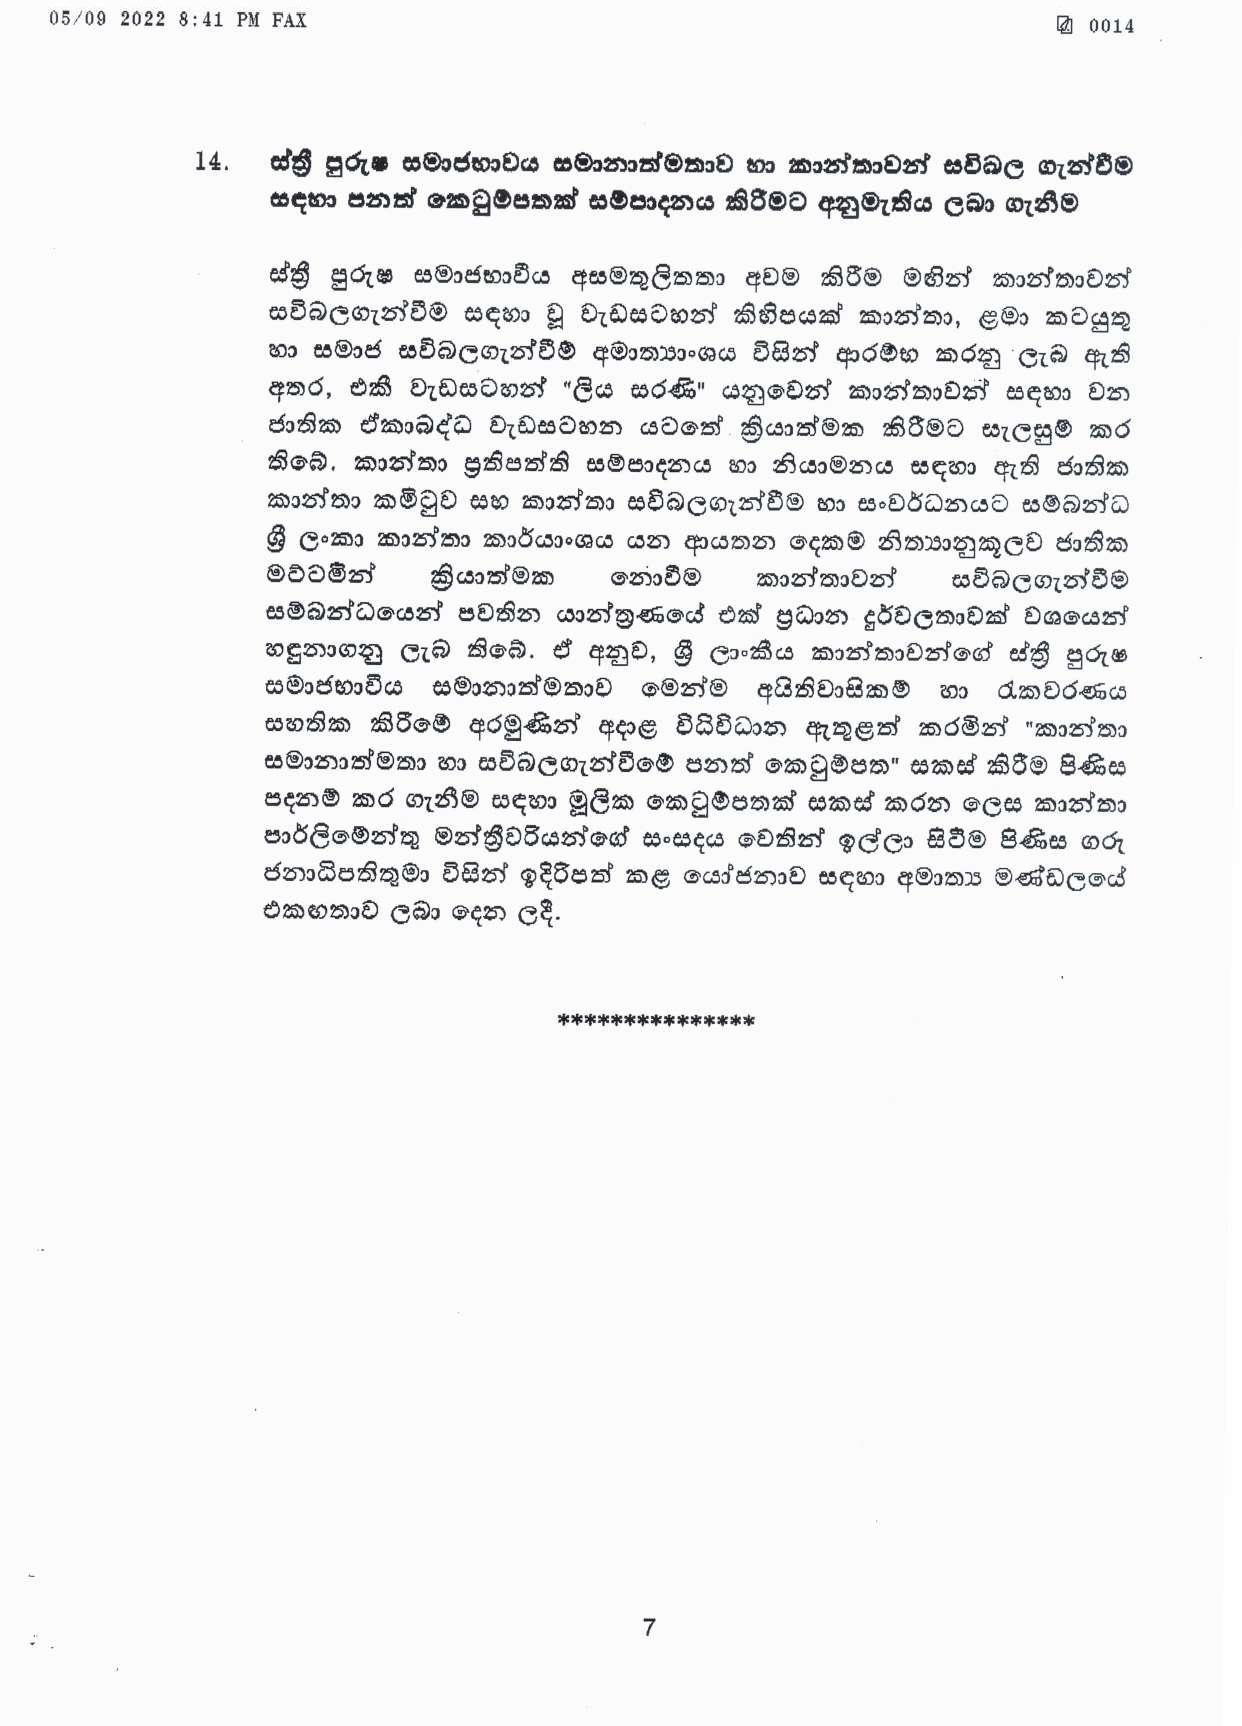 Cabinet Decision on 05.09.2022 page 007